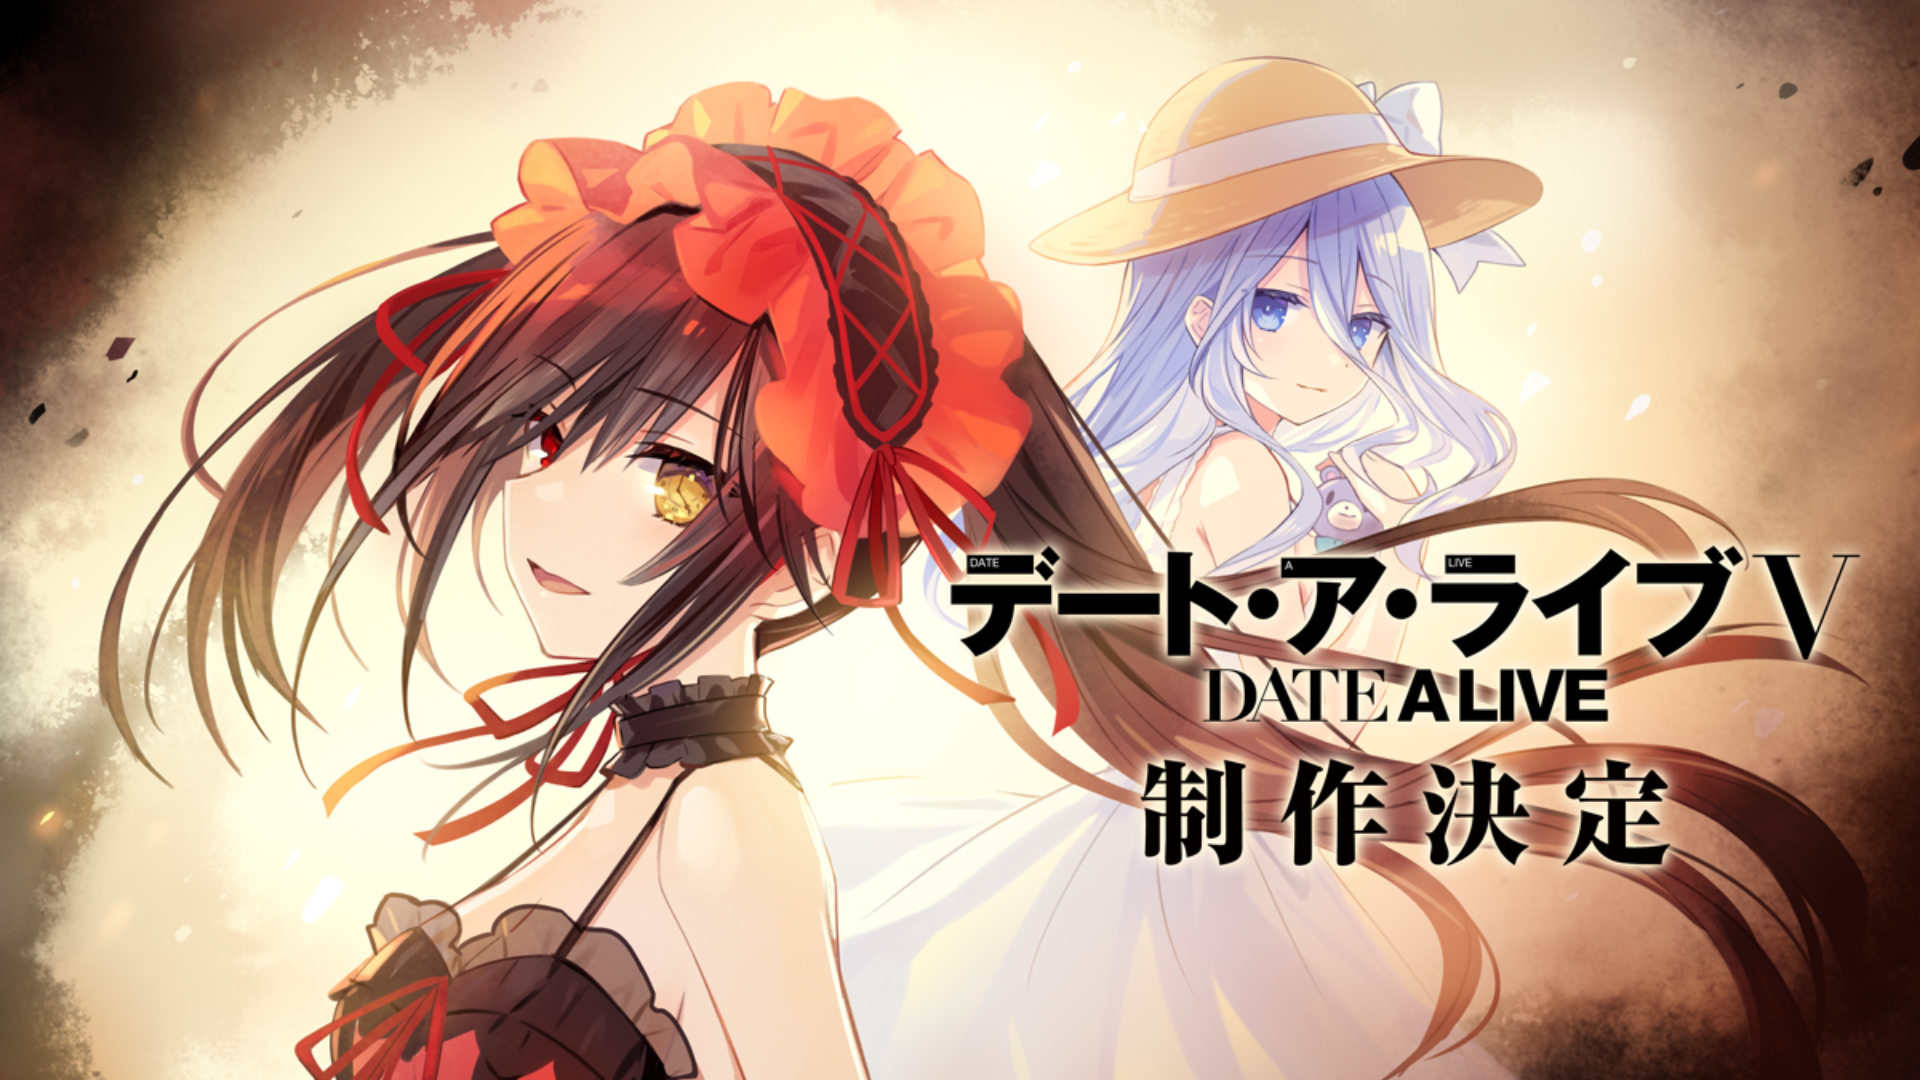 Date a Live IV Episode 10 Preview Images Released - Anime Corner